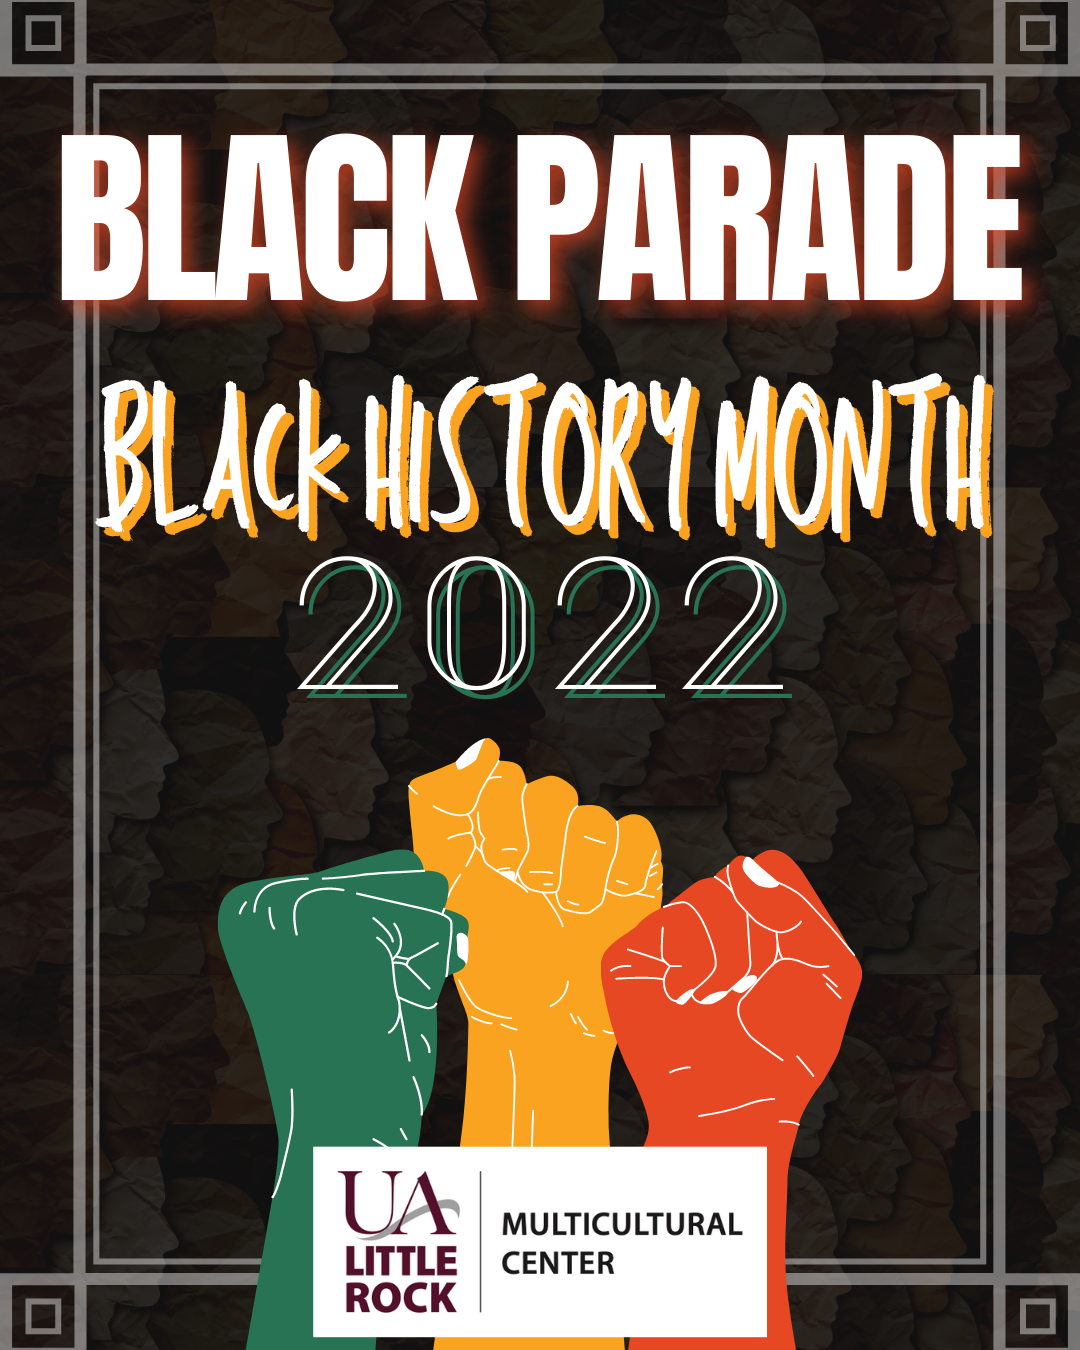 Black History Month events for February 2022